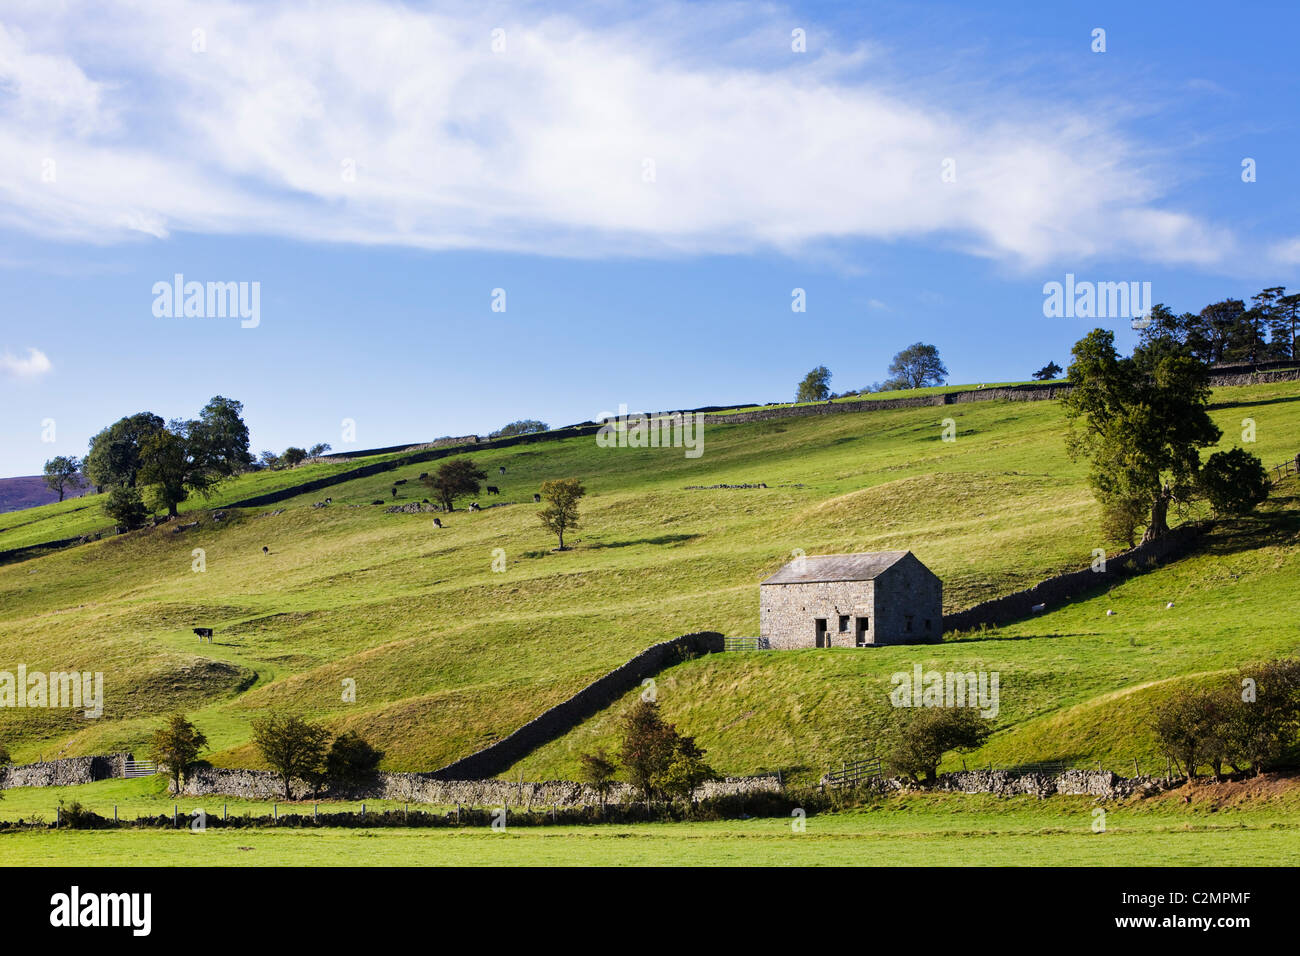 Barn in countryside in Swaledale, Yorkshire Dales National Park, North Yorkshire, England UK Stock Photo